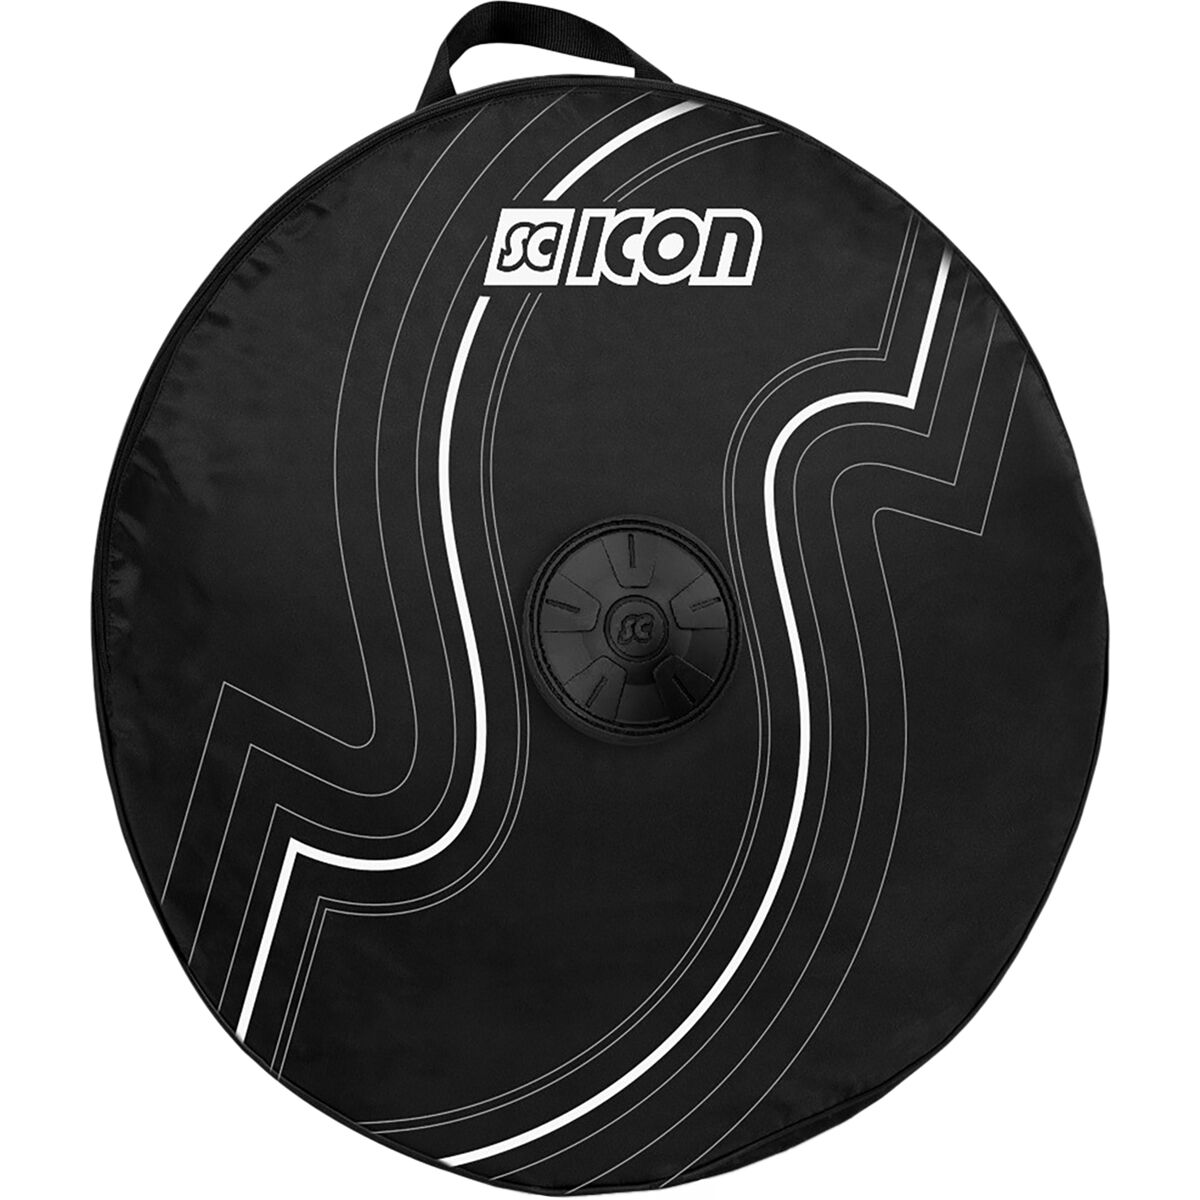 SciCon Single Wheel Padded Bag Black, One Size